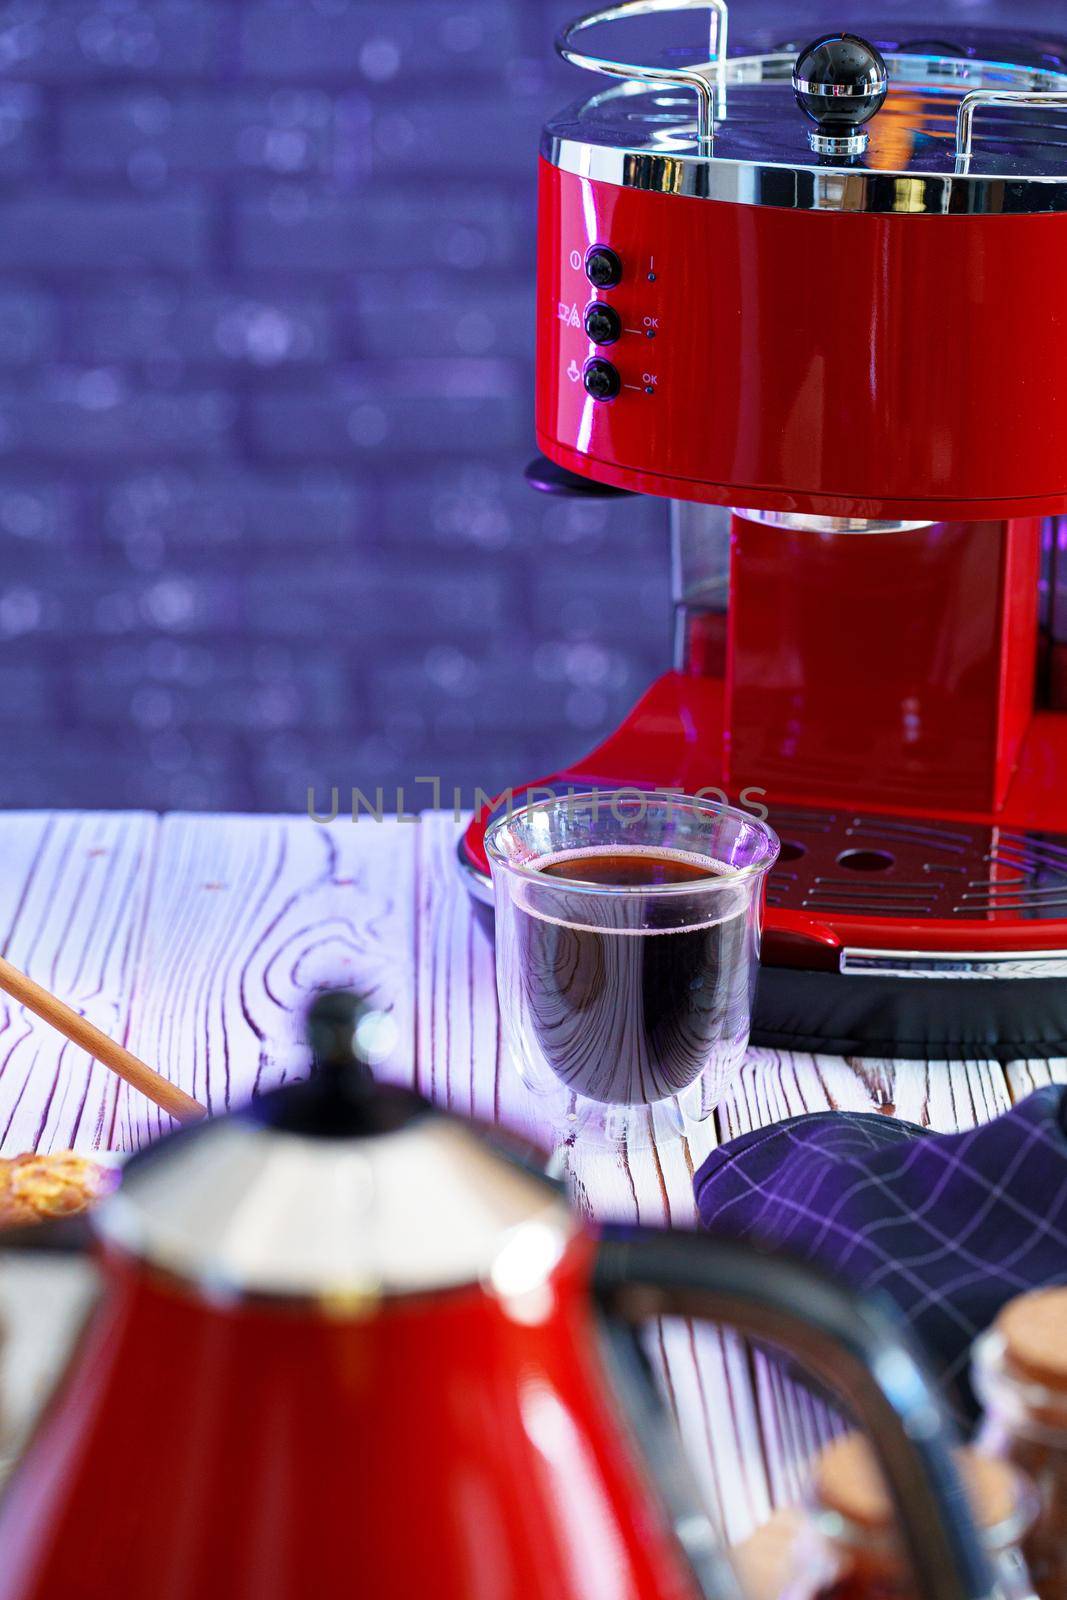 Red coffee machine with a glass on kitchen counter, close up